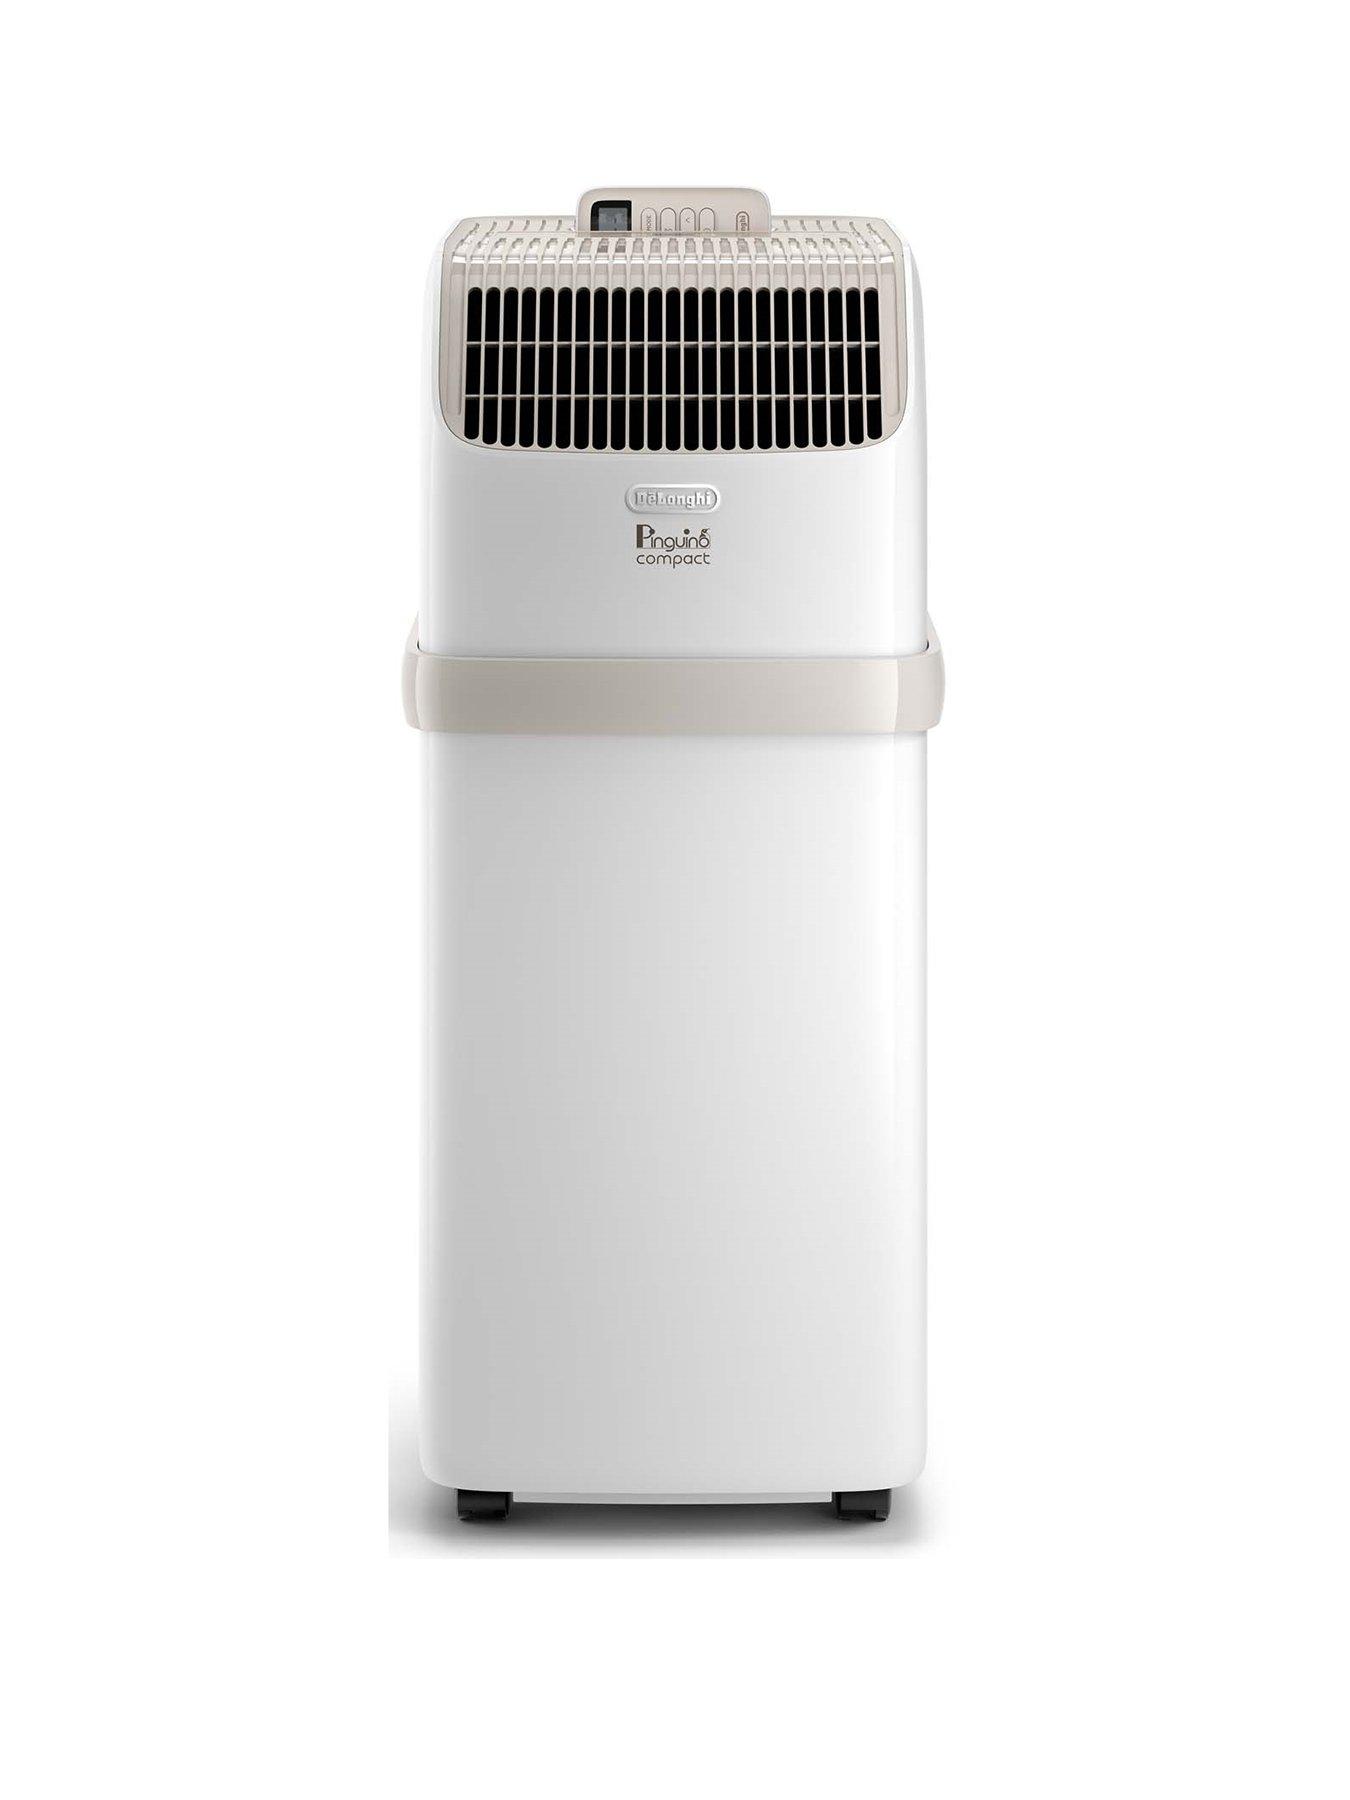 The Best Wearable Air Conditioner Is Up to 40% Off on